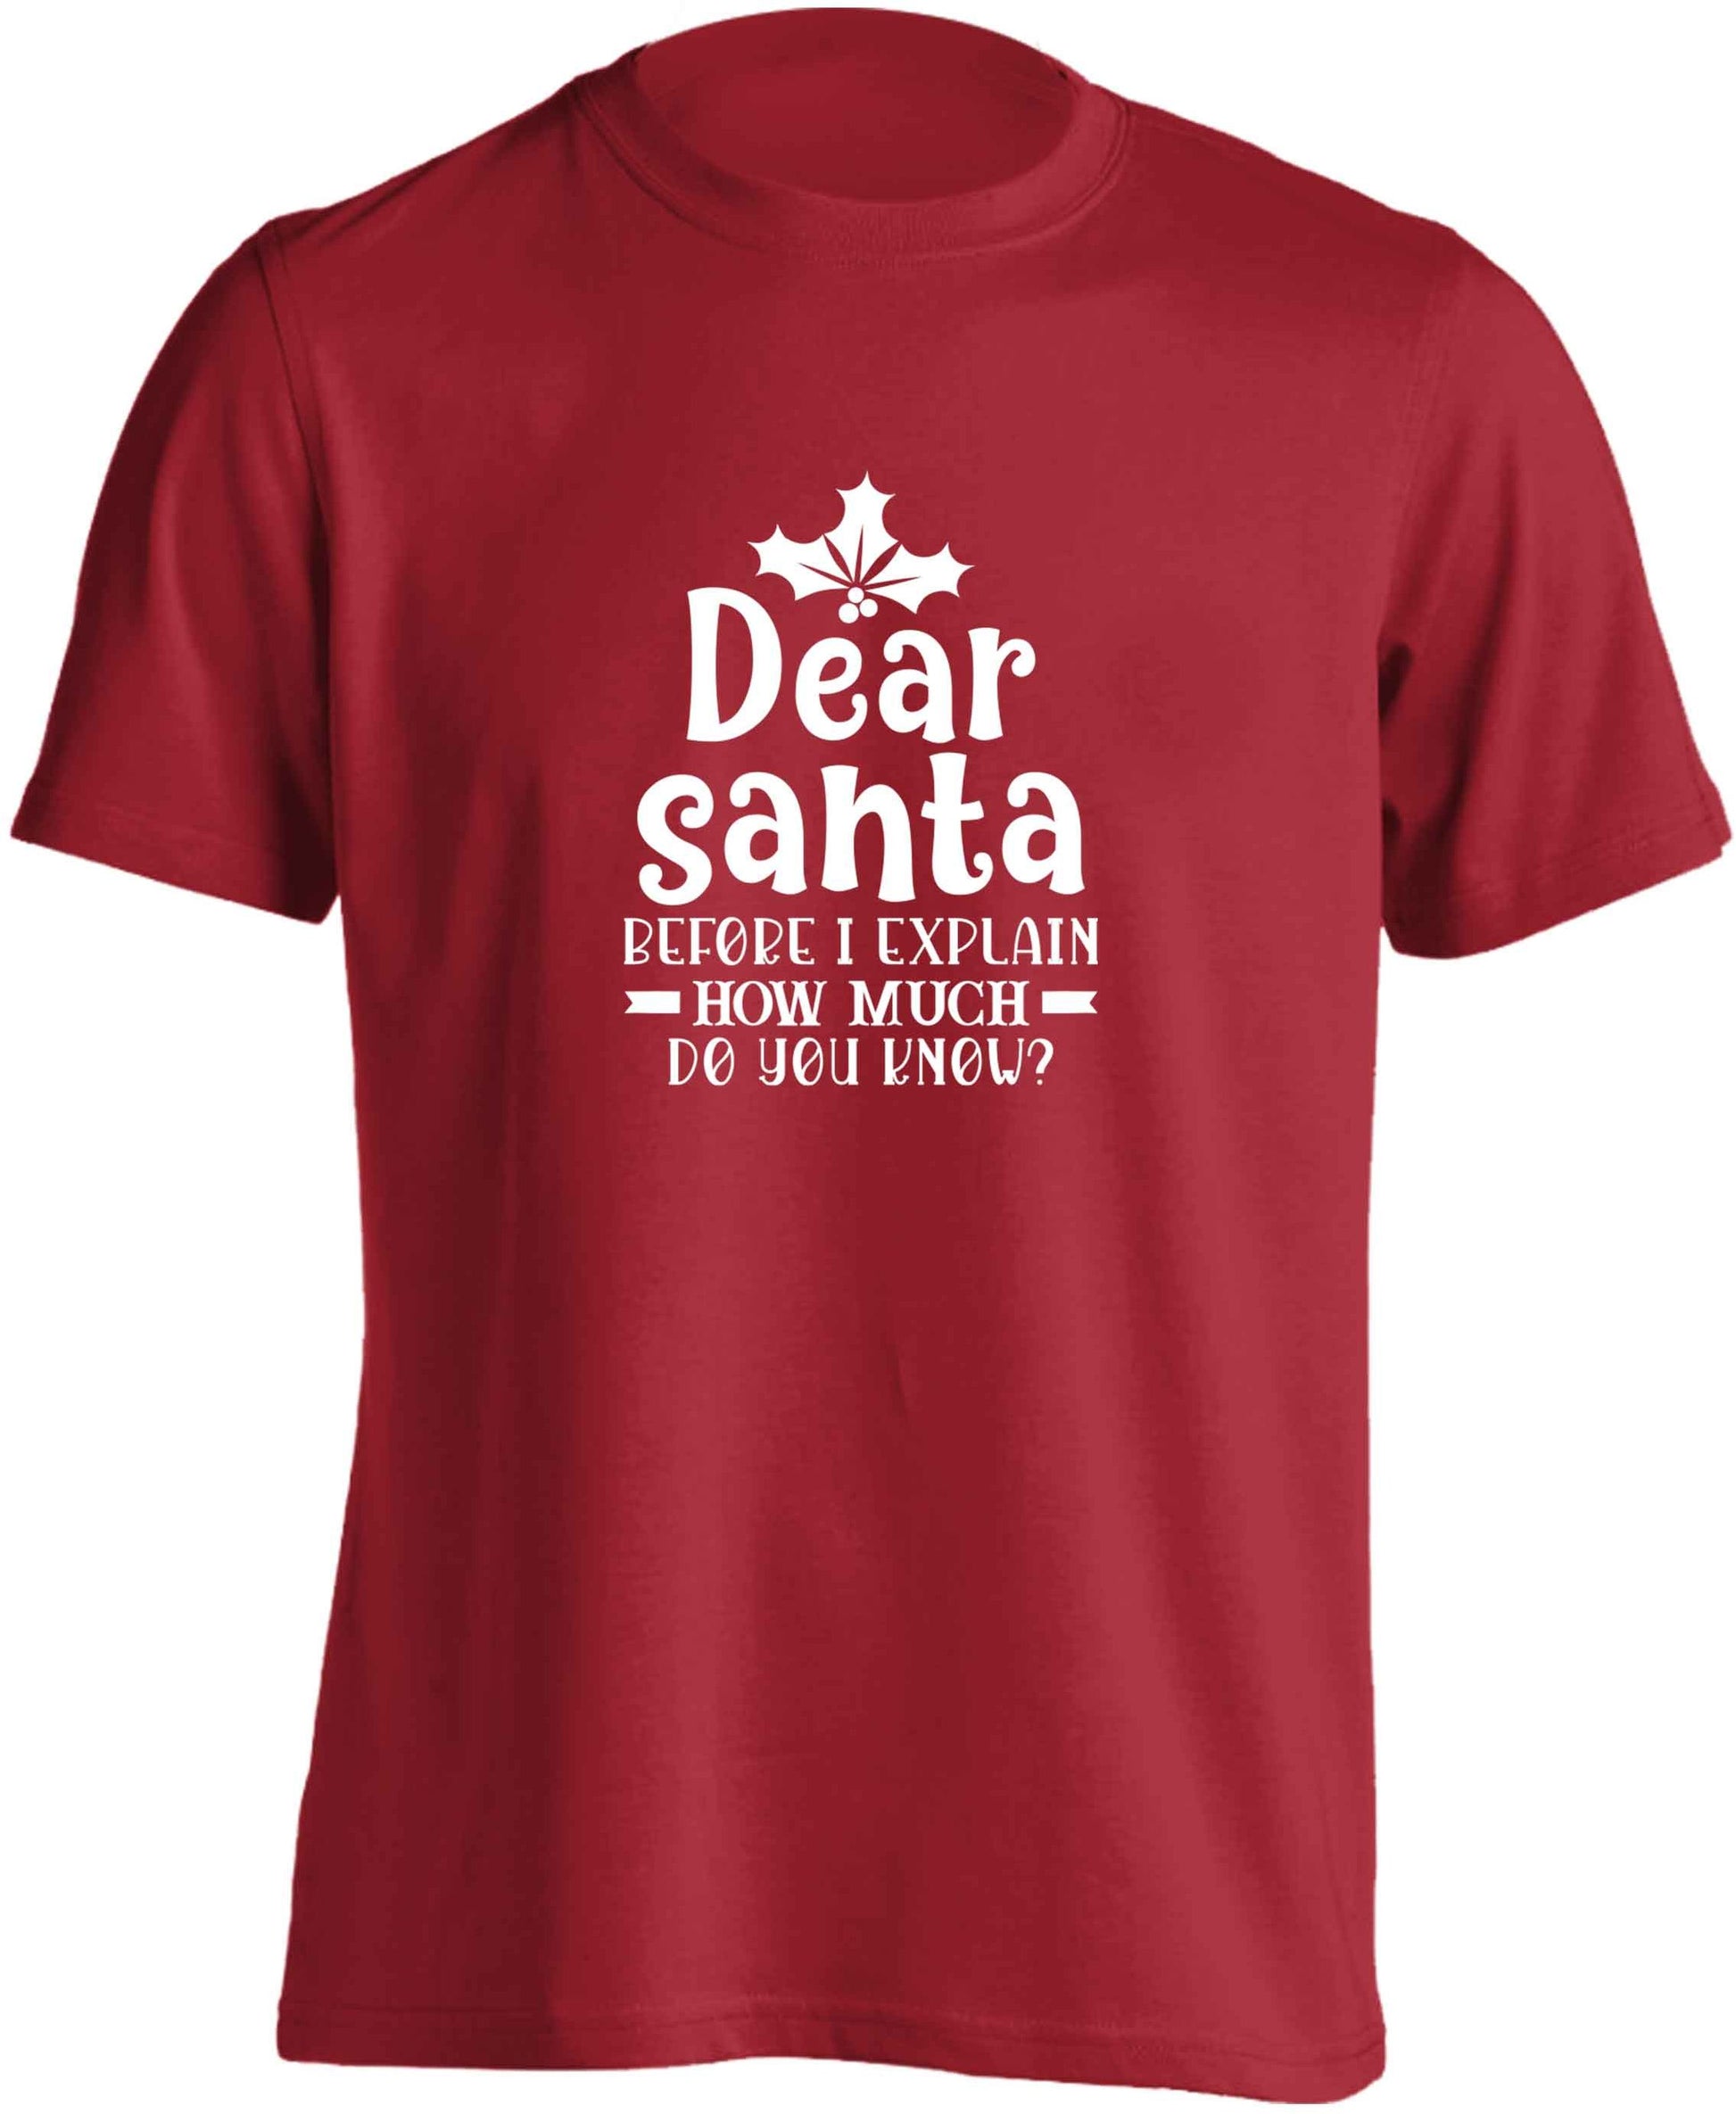 Santa before I explain how much do you know? adults unisex red Tshirt 2XL